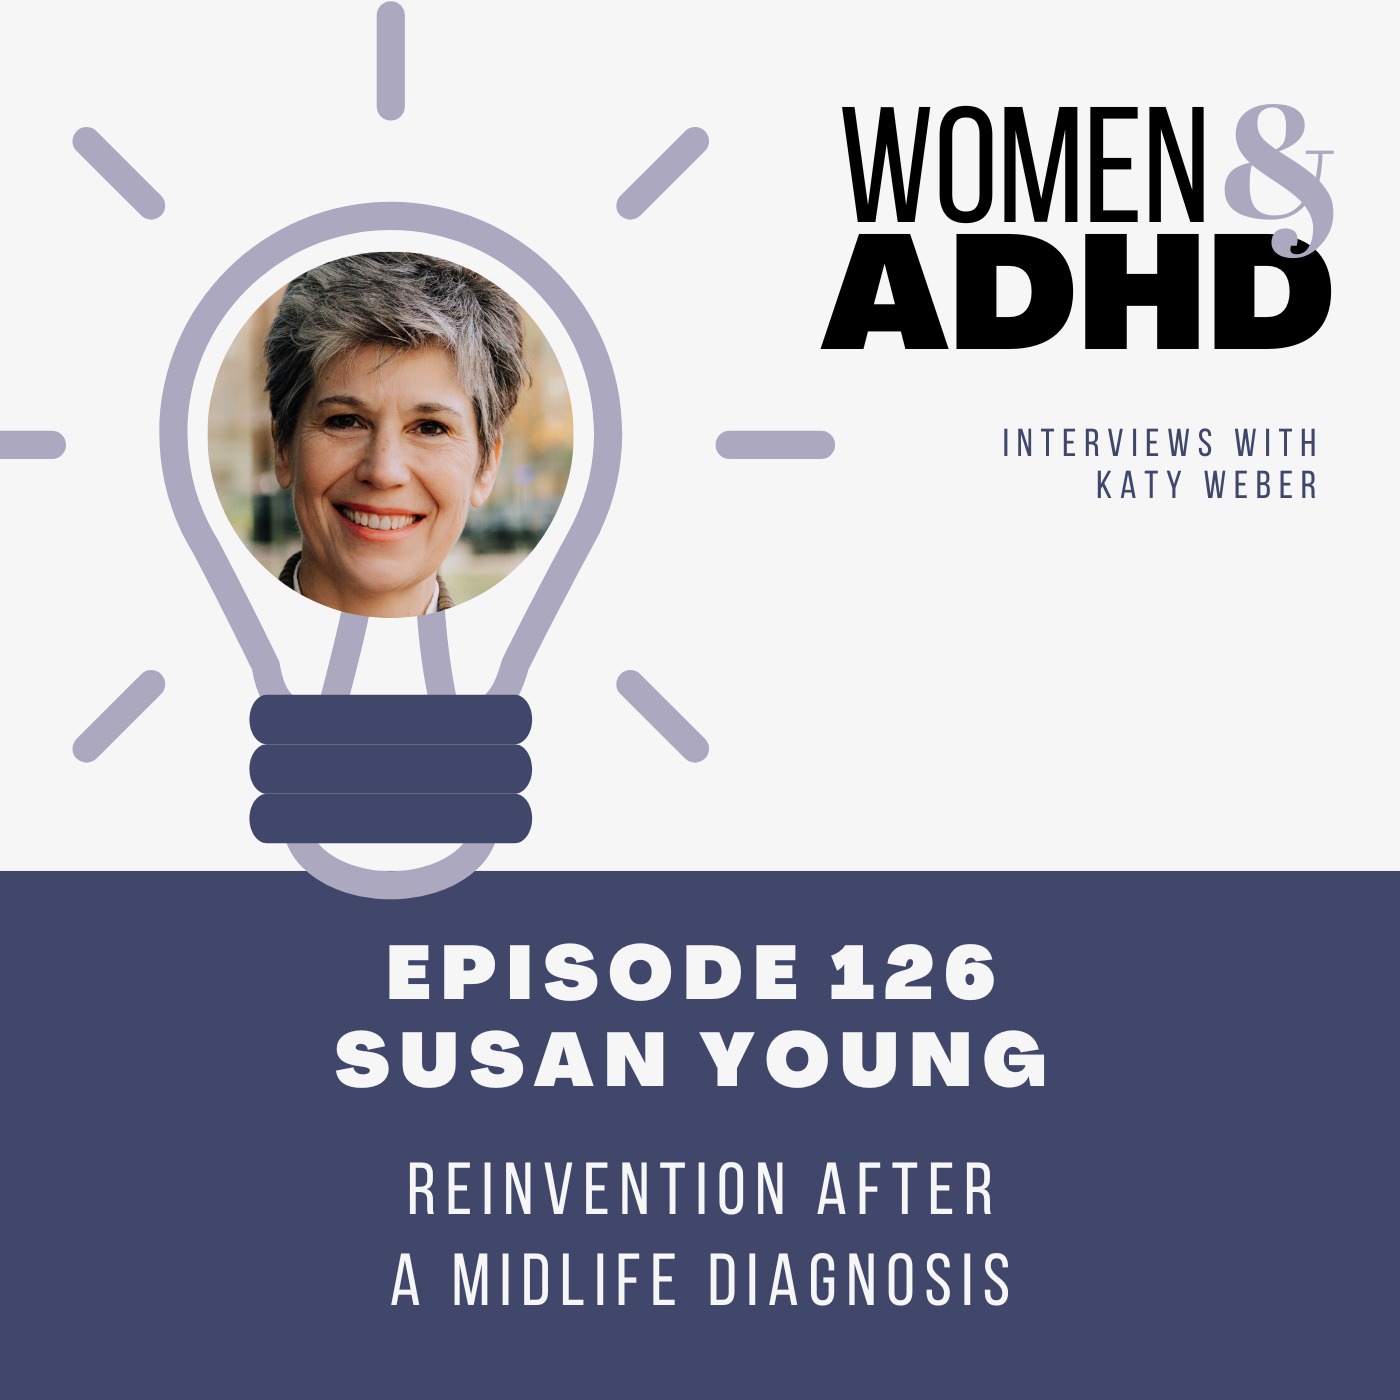 Susan Young: Reinvention after a midlife diagnosis